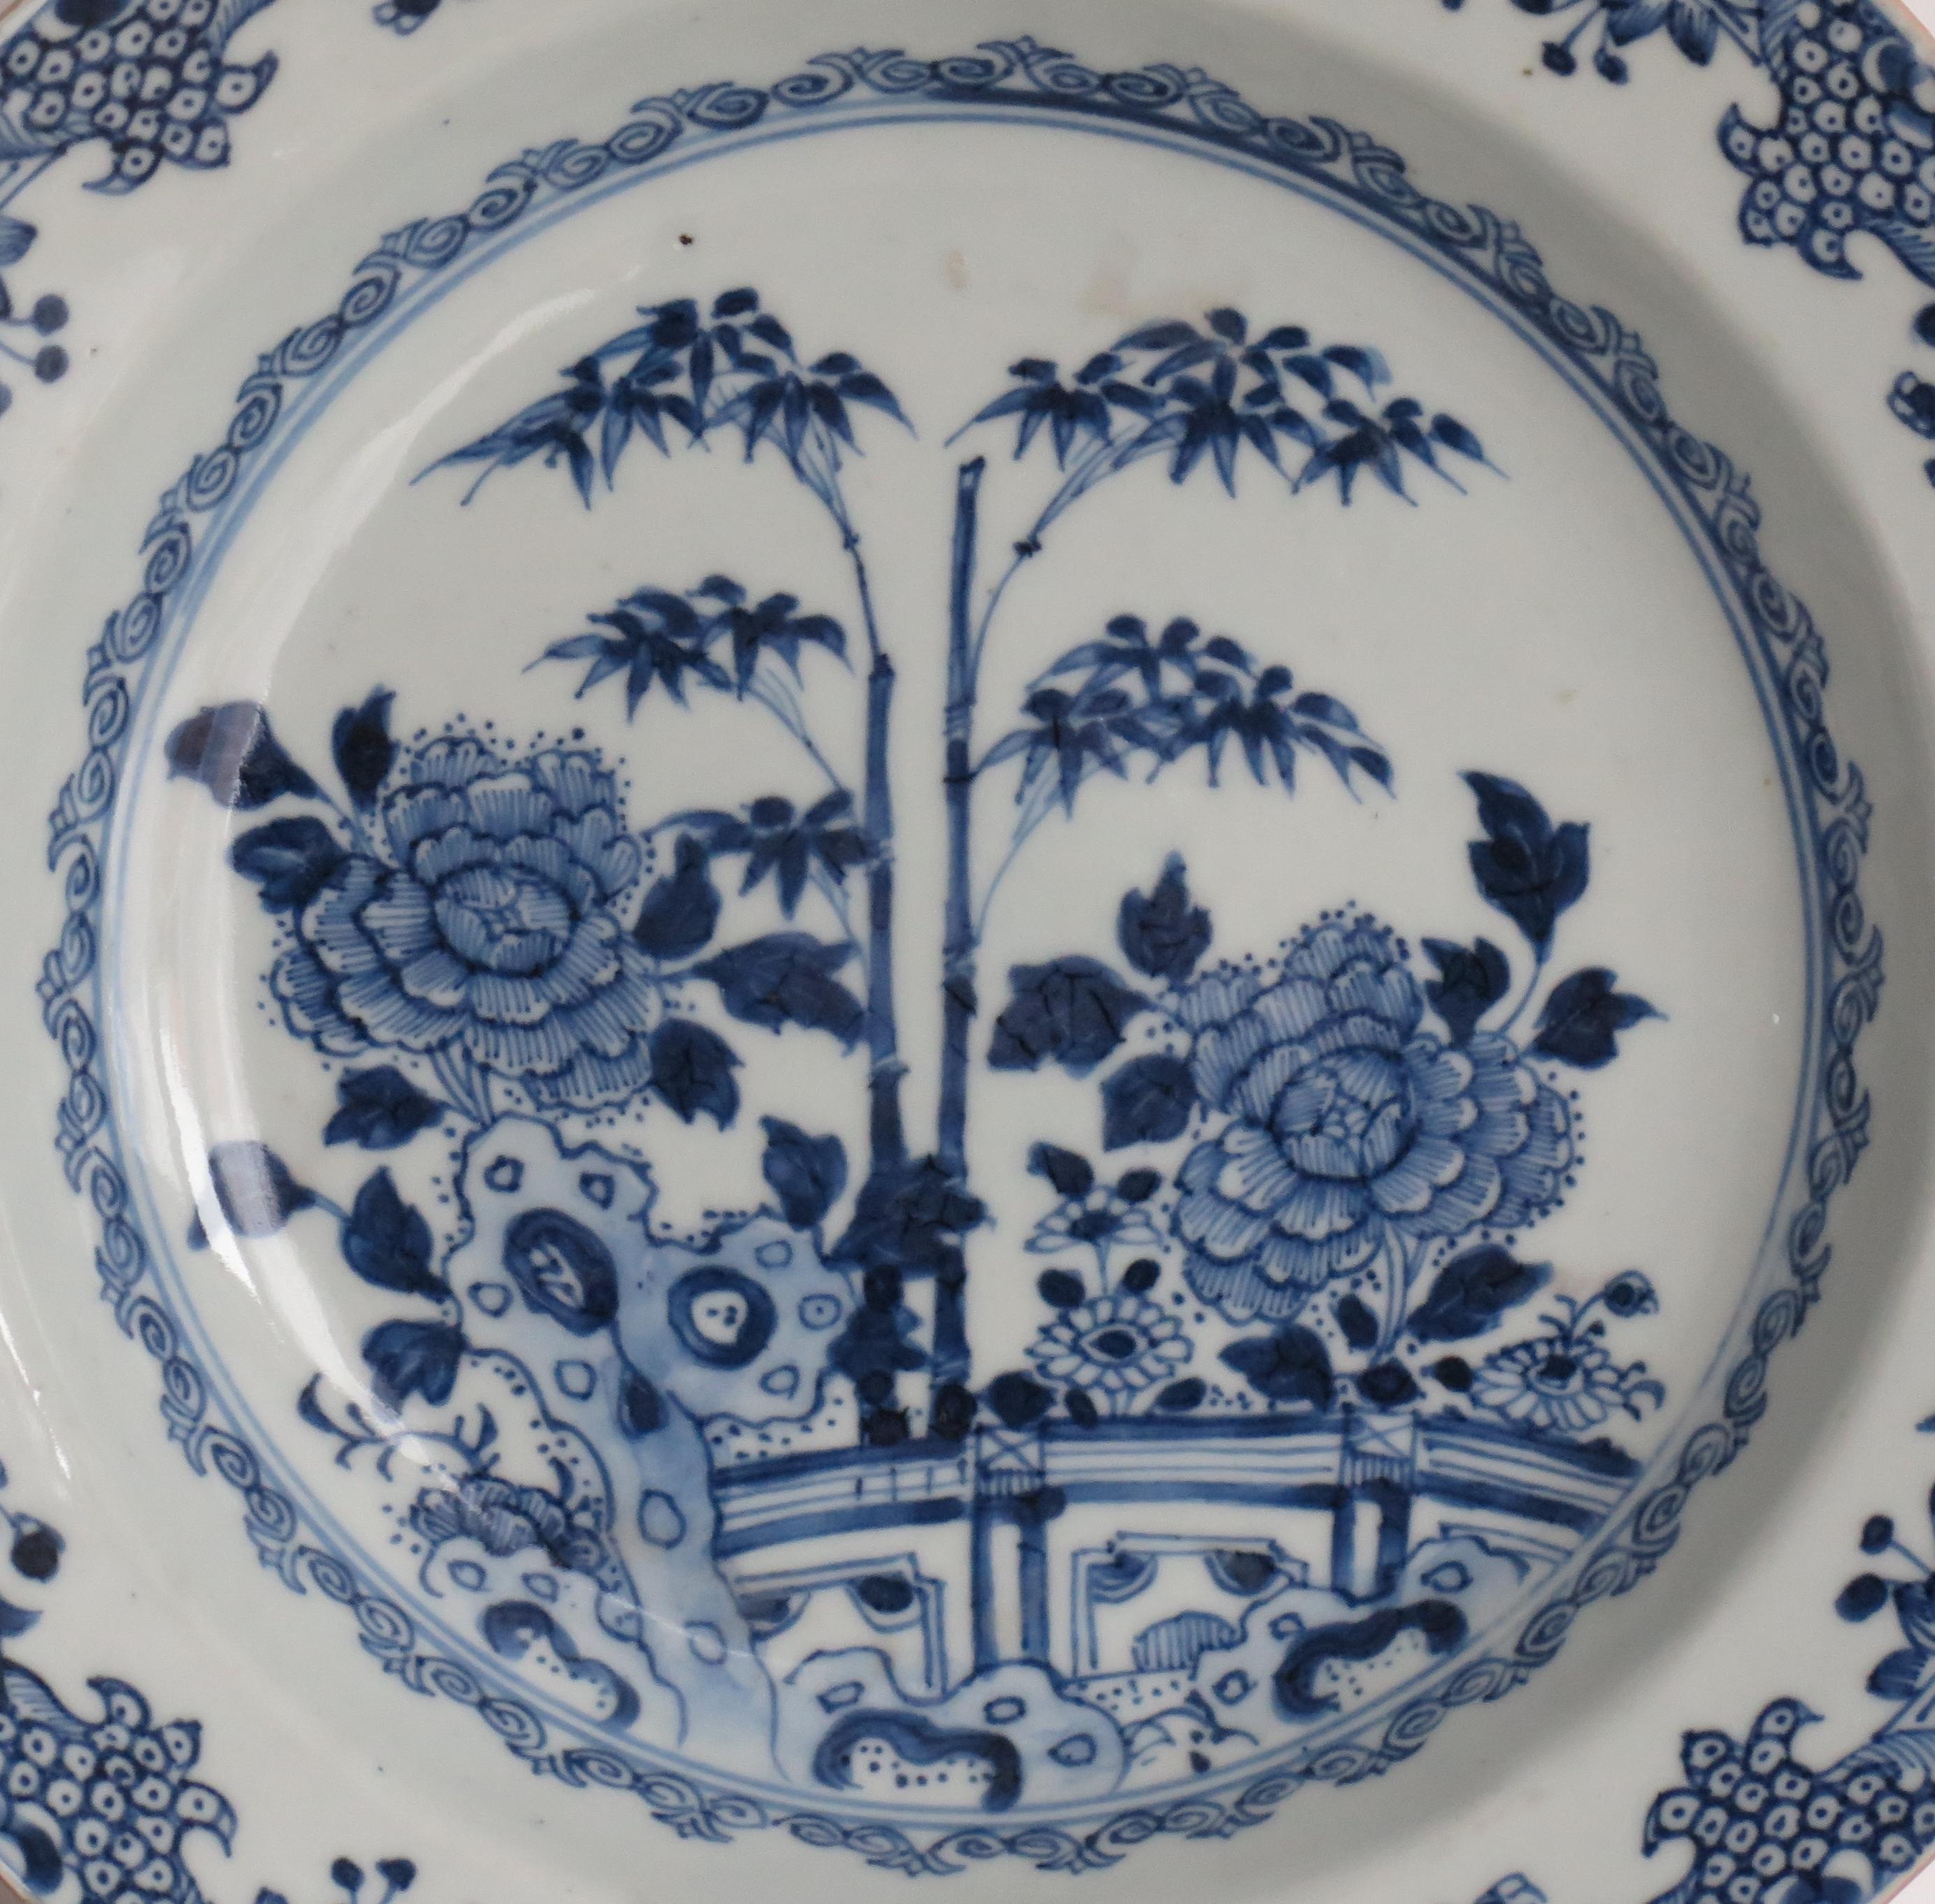 Hand-Painted Chinese Export Soup or Deep Plate Canton Blue & White Porcelain, Qing circa 1770